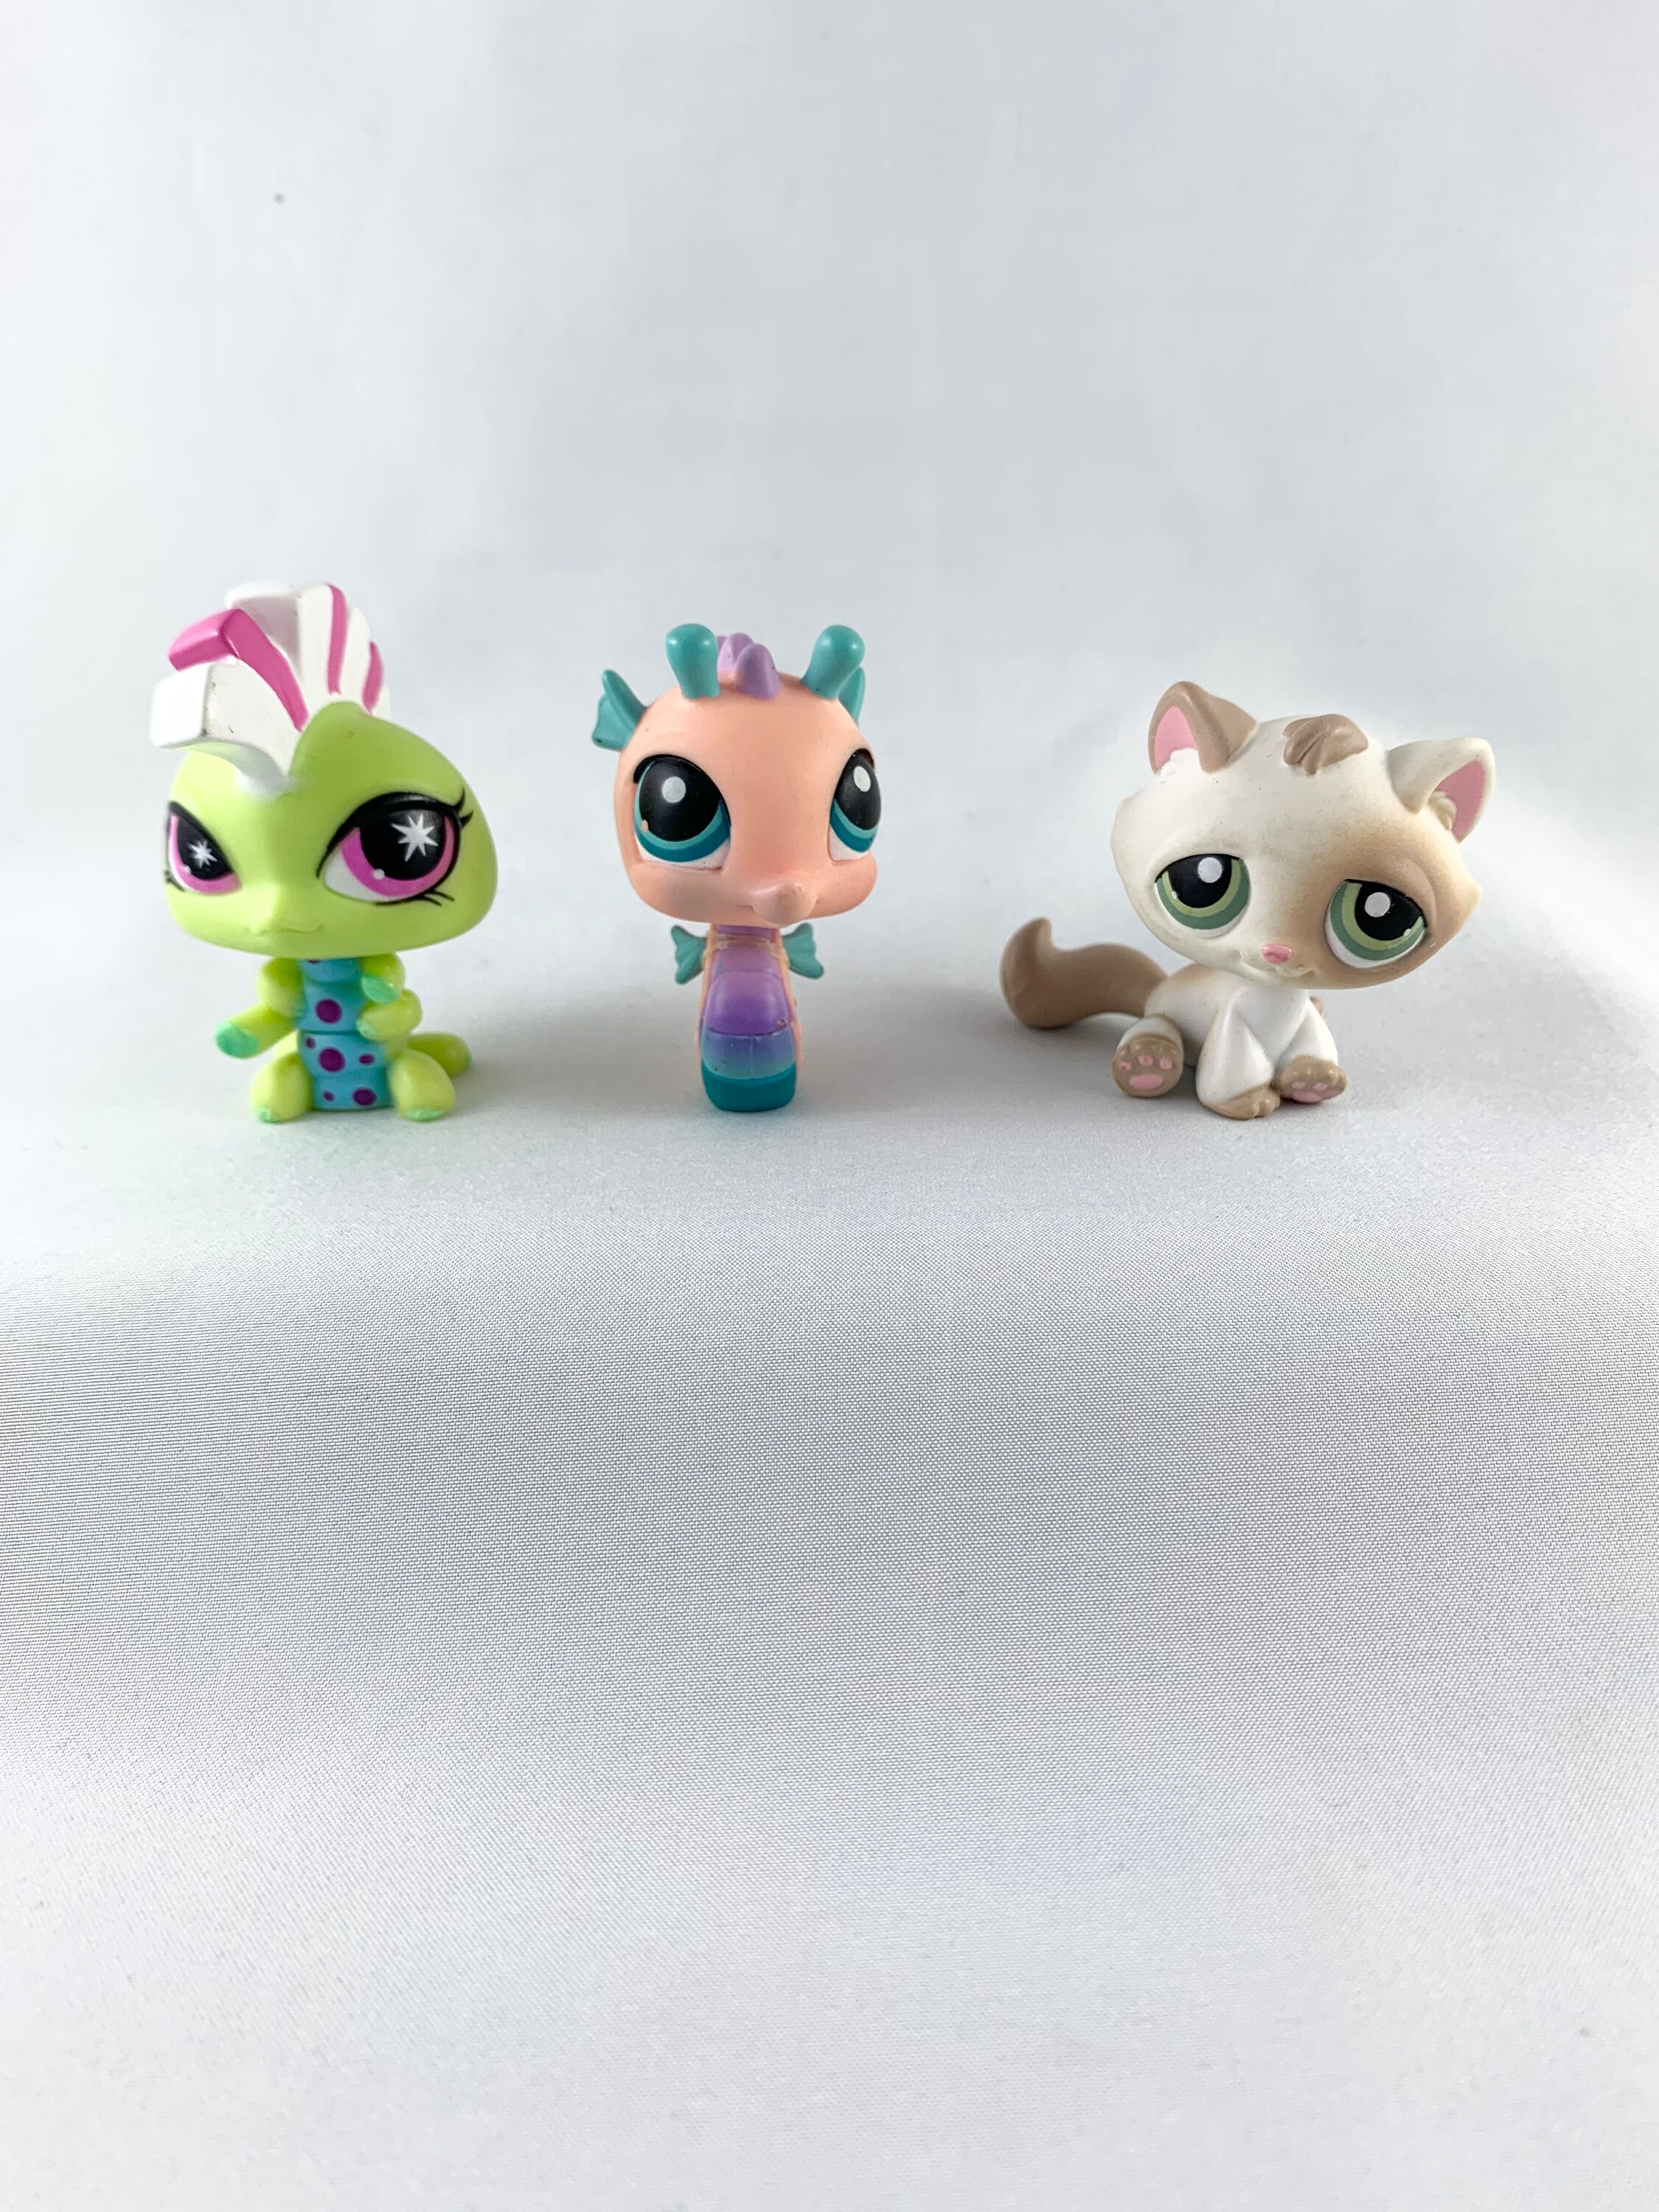 Littlest Pet Shop Limited Edition Collector's 10-Pack [Horse, Panther,  Dachshund, Cockatoo, Guinea Pig, Hamster, Turtle, Fox, Bear and Bunny]